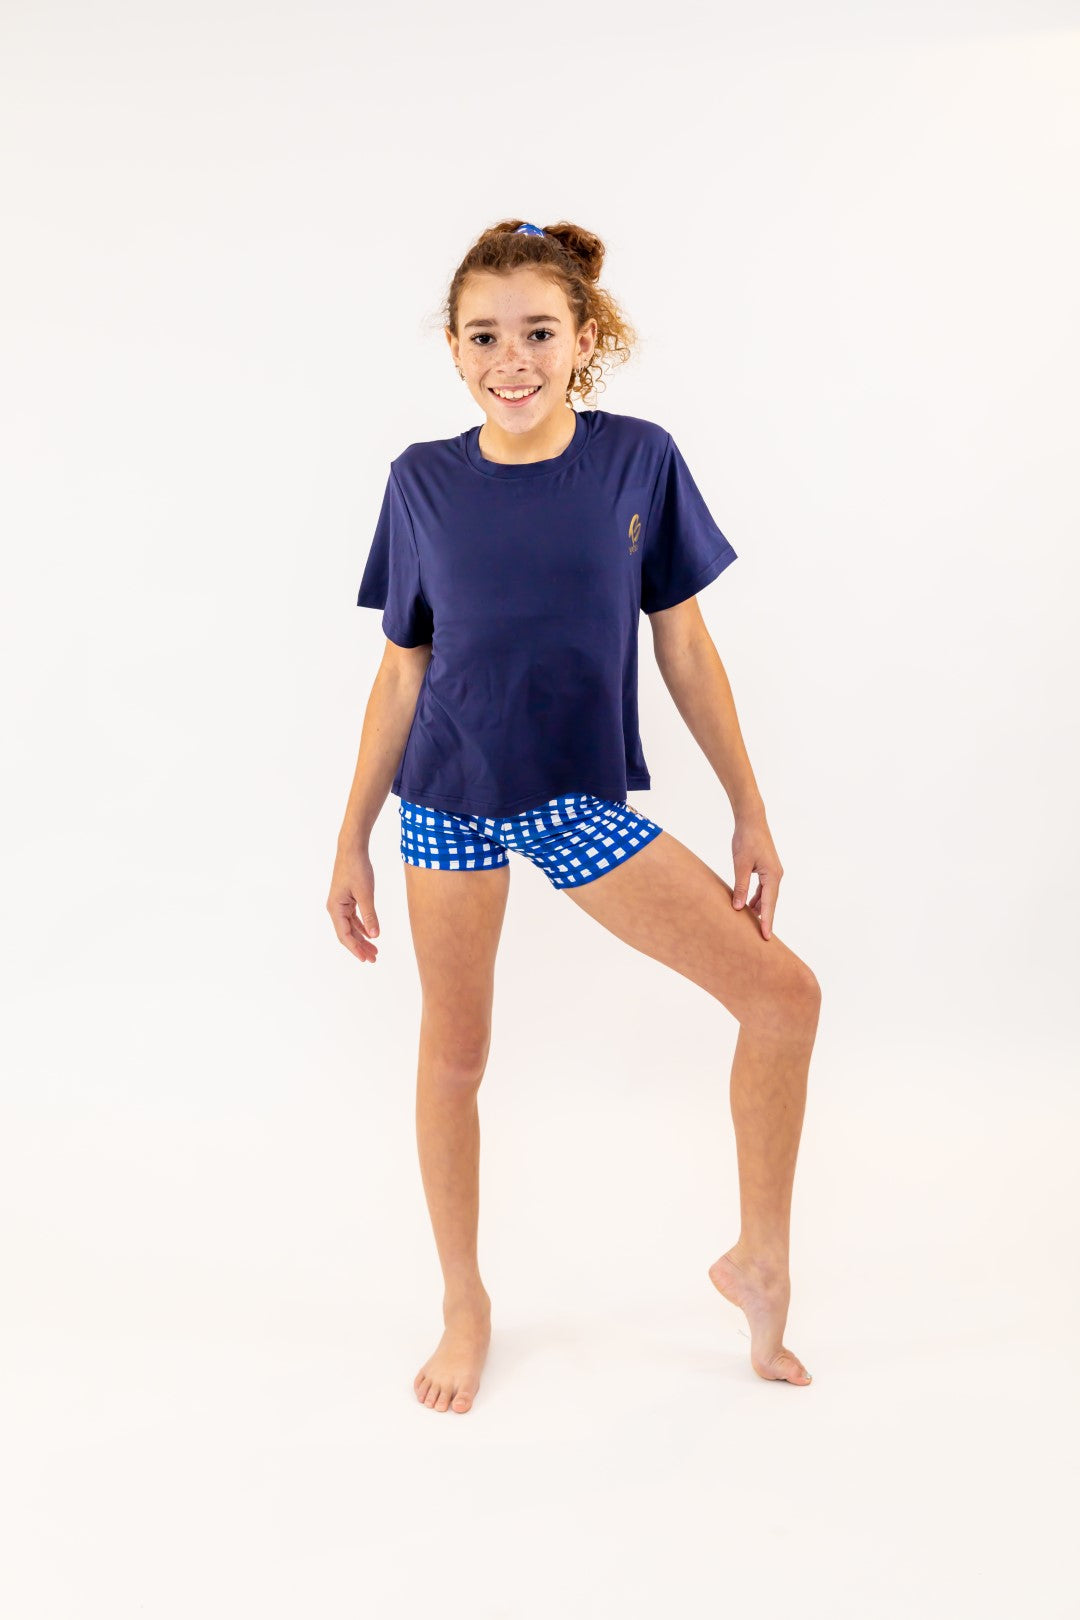 Navy Cropped T Shirt